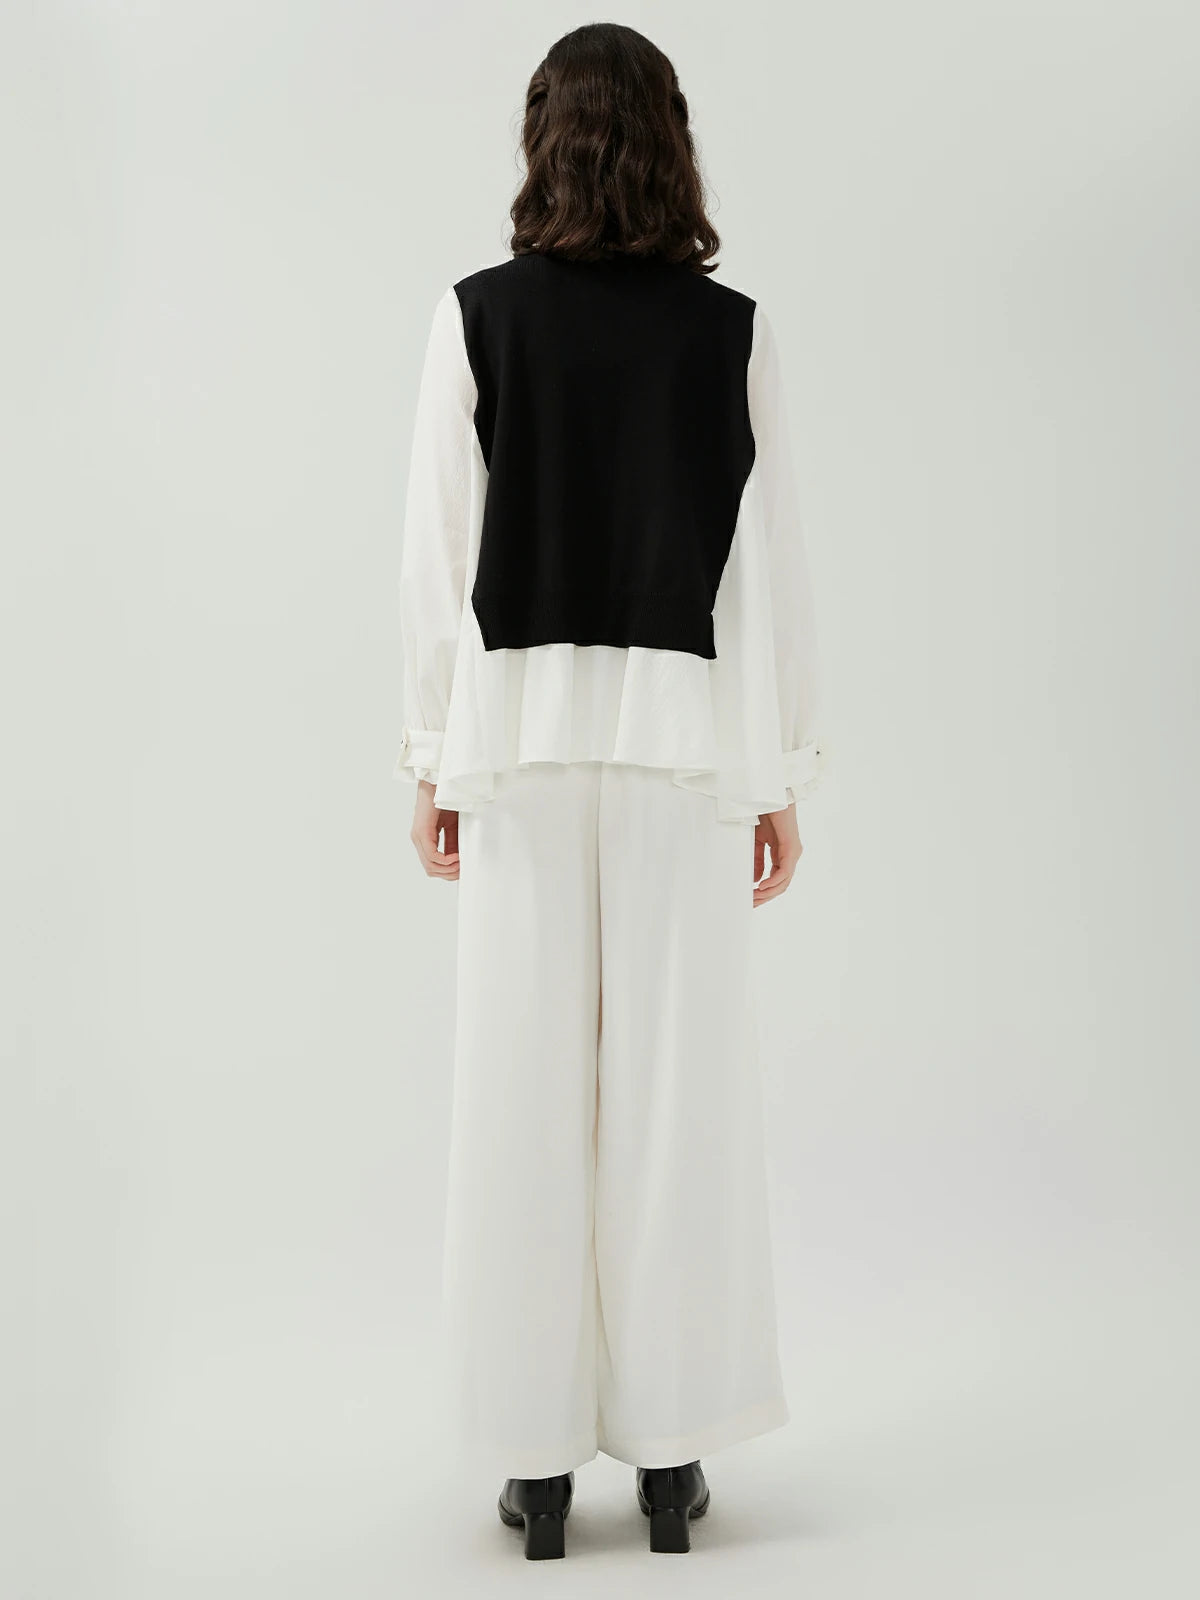 Modern Fashion Contrast Shirt with Ruffled Edges: A contemporary design with delicate details.